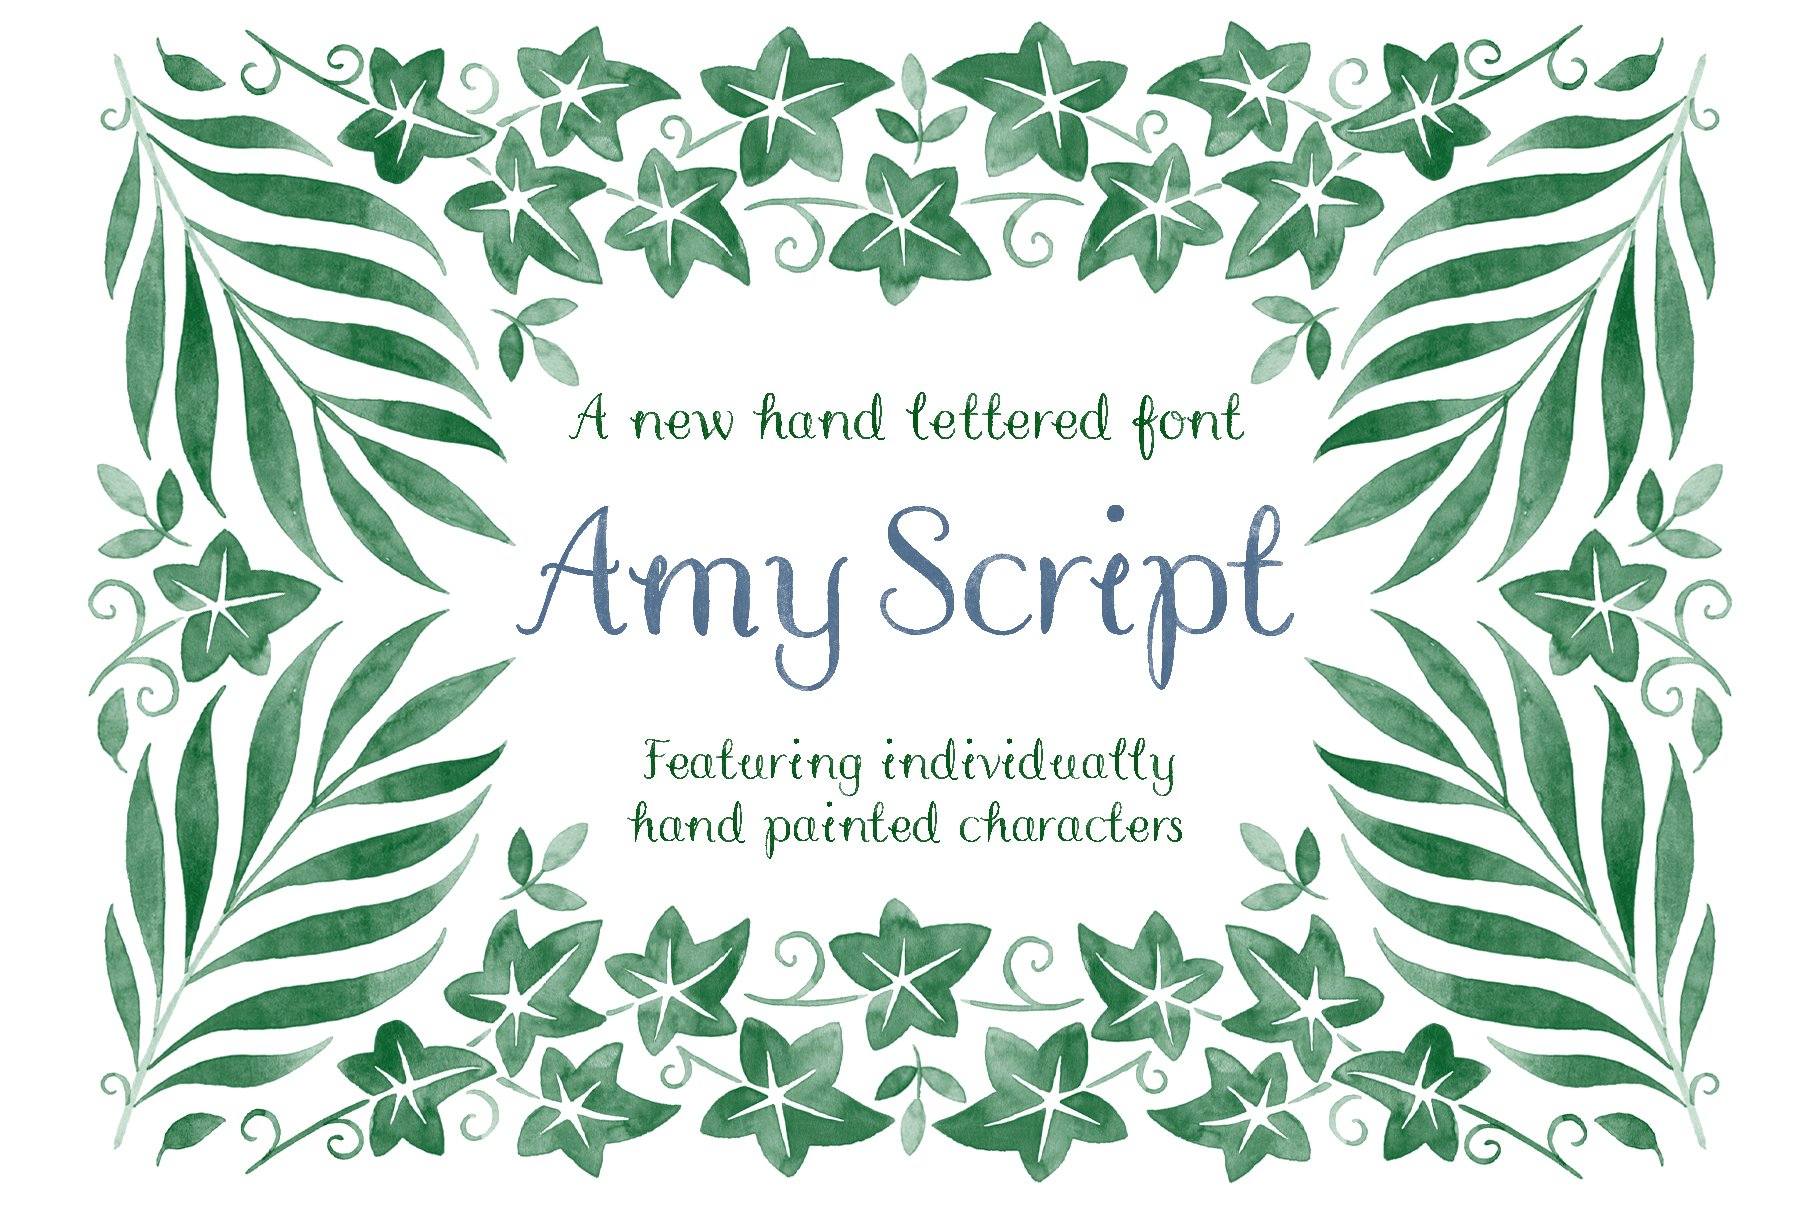 Amy Script Hand Lettered Font cover image.